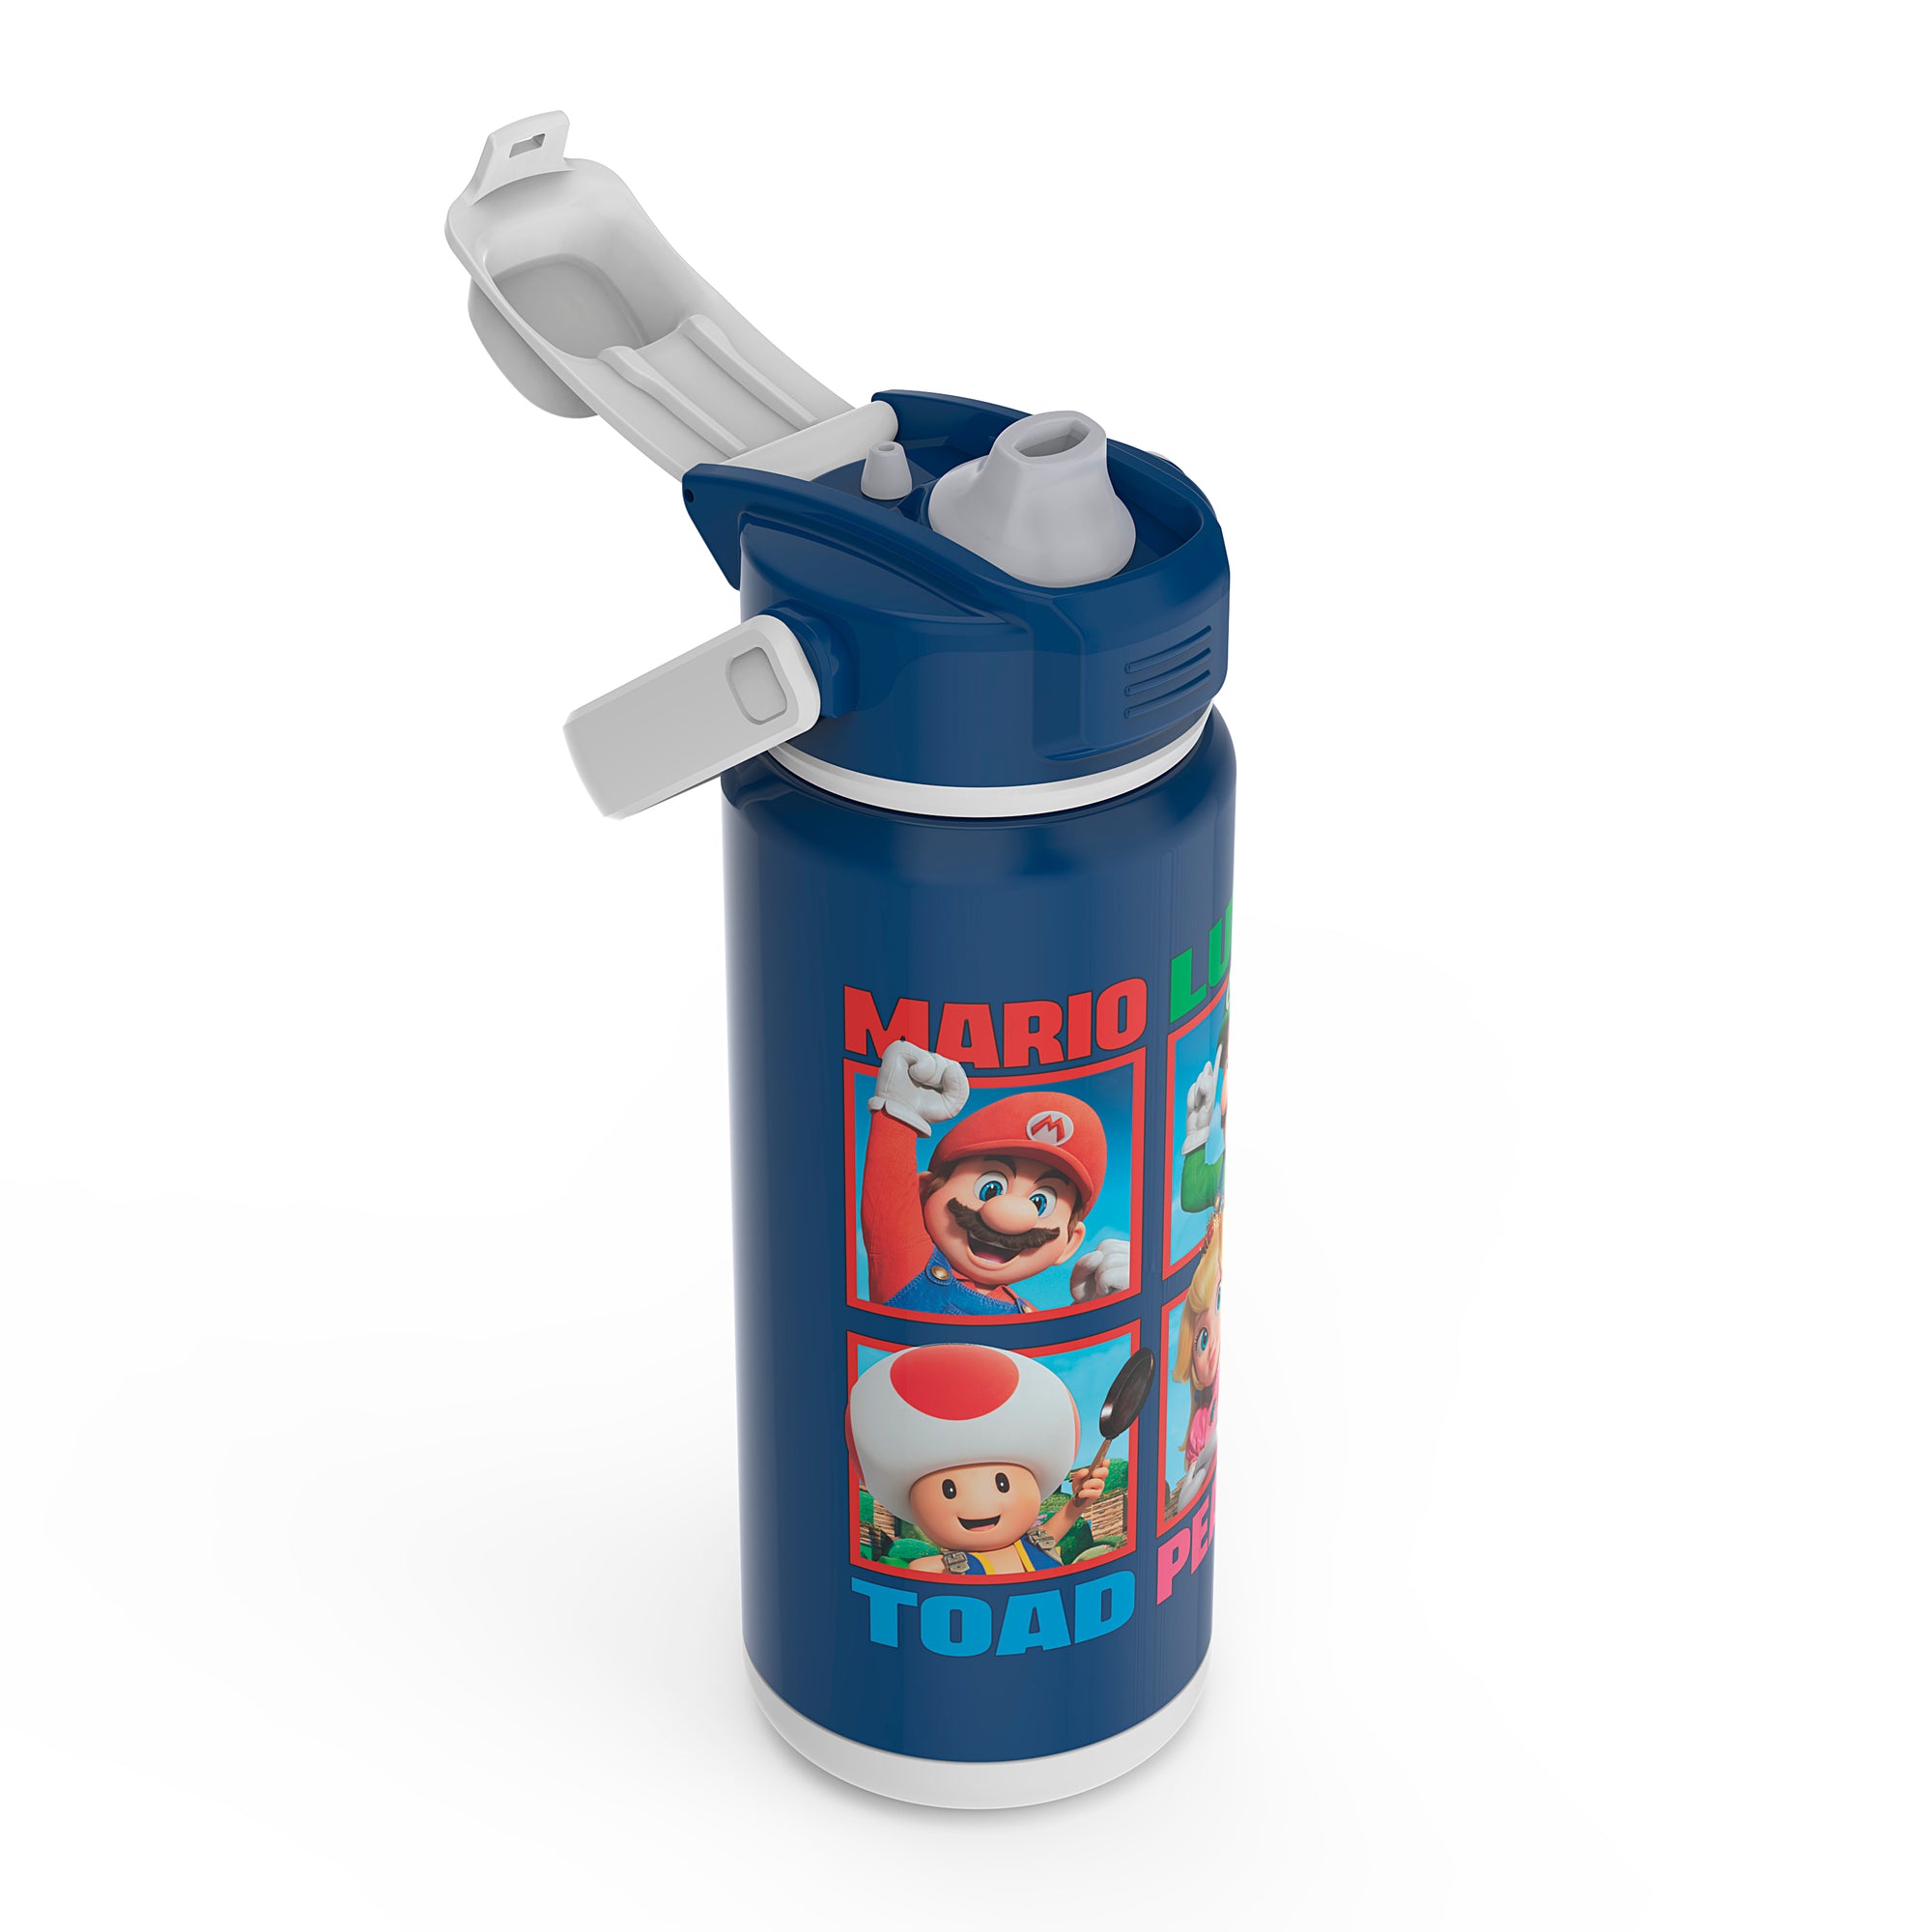 Super Mario Bros. Beacon Stainless Steel Insulated Kids Water Bottle with Covered Spout, 20 Ounces